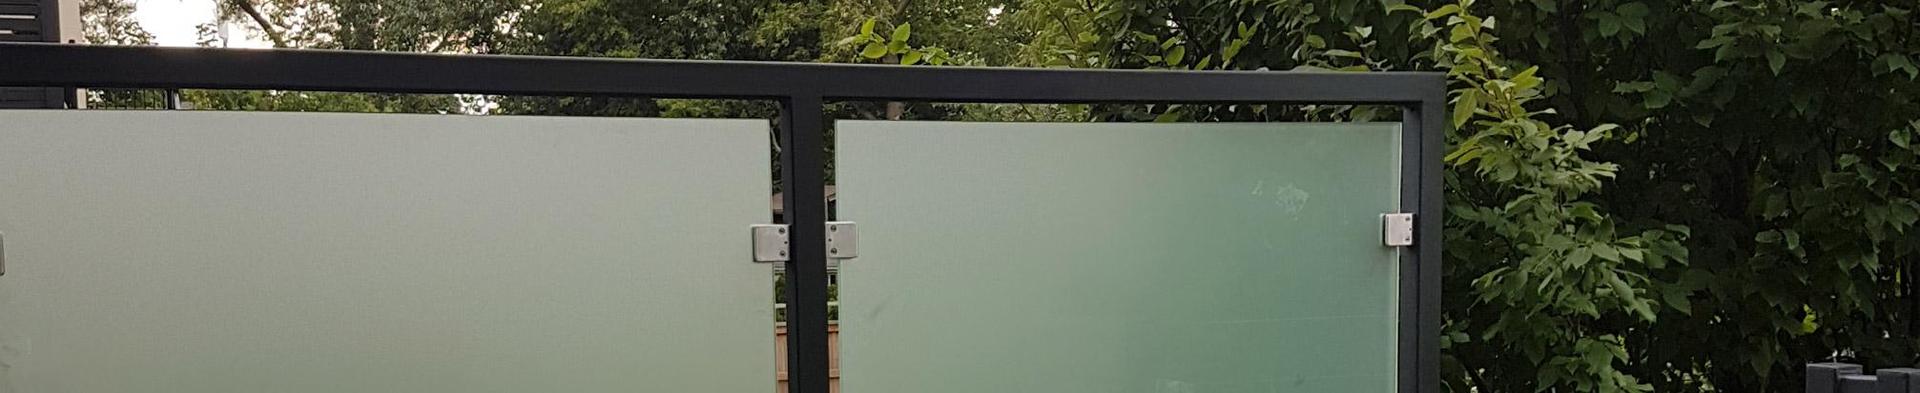 privacy screen for deck railing